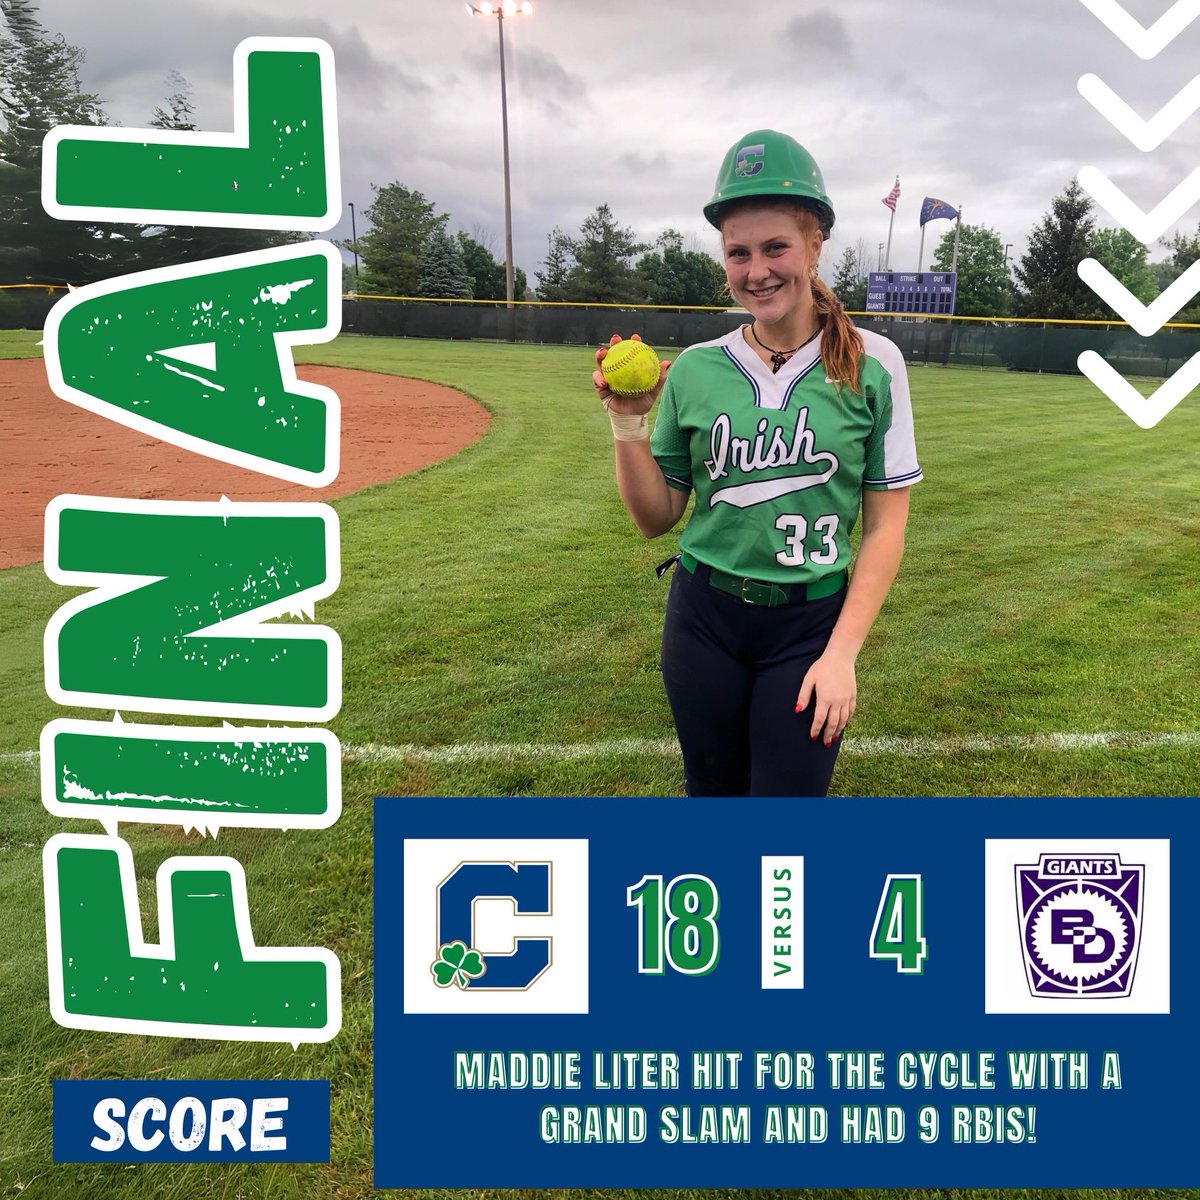 Irish travel in the rain and finish in the rain🌧️ ⁦@MaddieLiter⁩ hits for the CYCLE and ⁦⁦@anna_moore_06⁩ & ⁦@mar_yhughes⁩ combine for 6 hits and 7 runs.